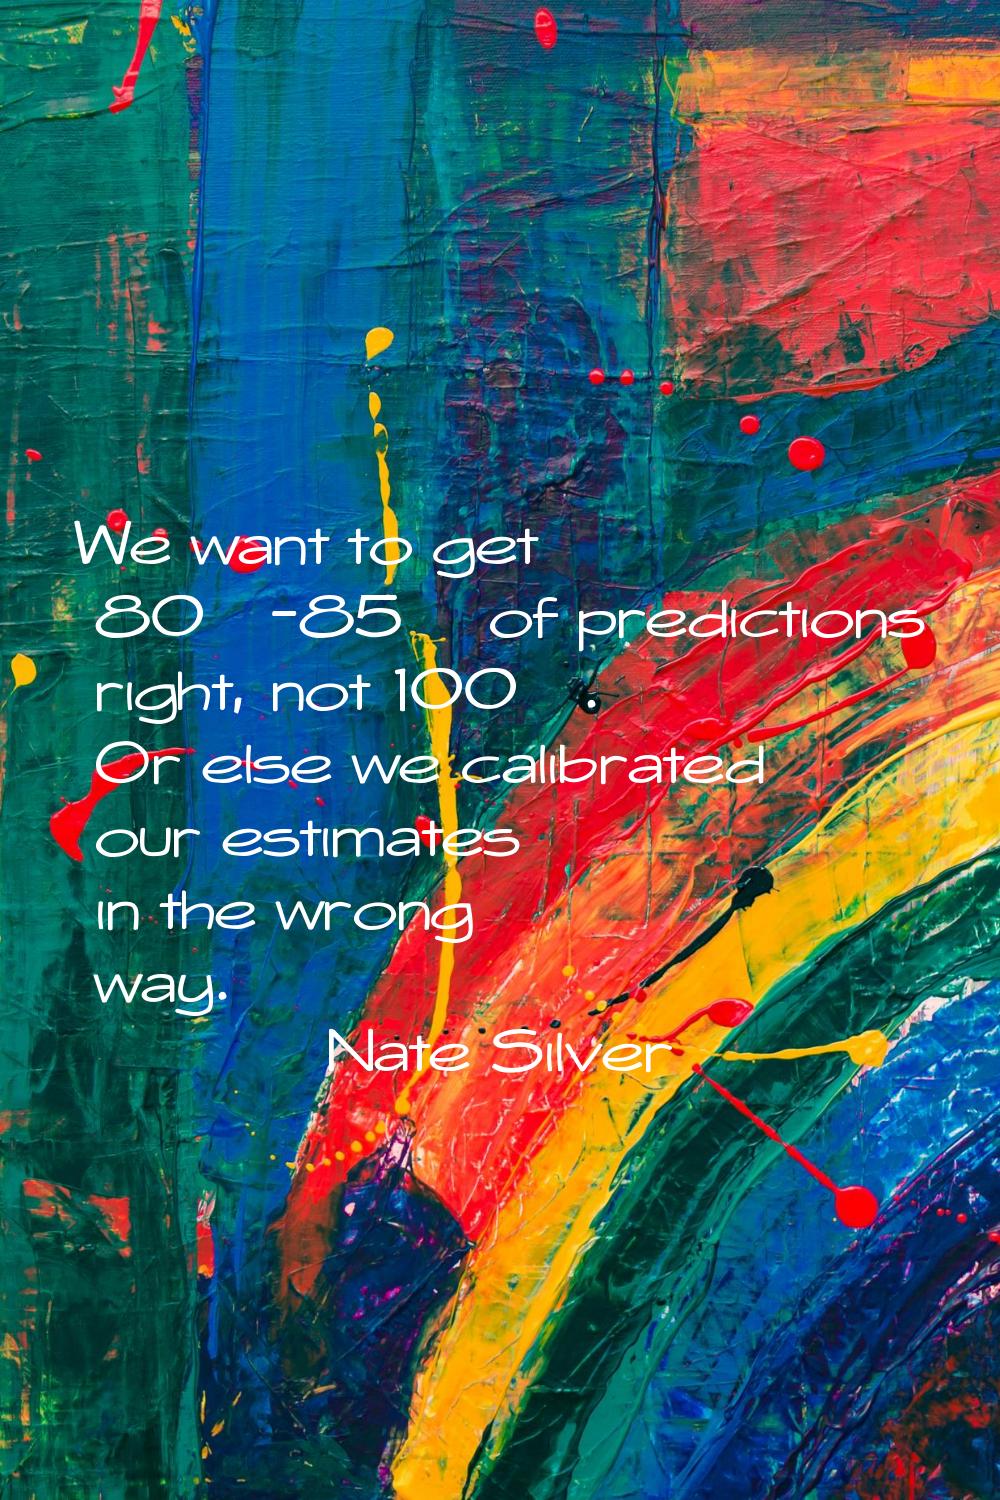 We want to get 80%-85% of predictions right, not 100%. Or else we calibrated our estimates in the w